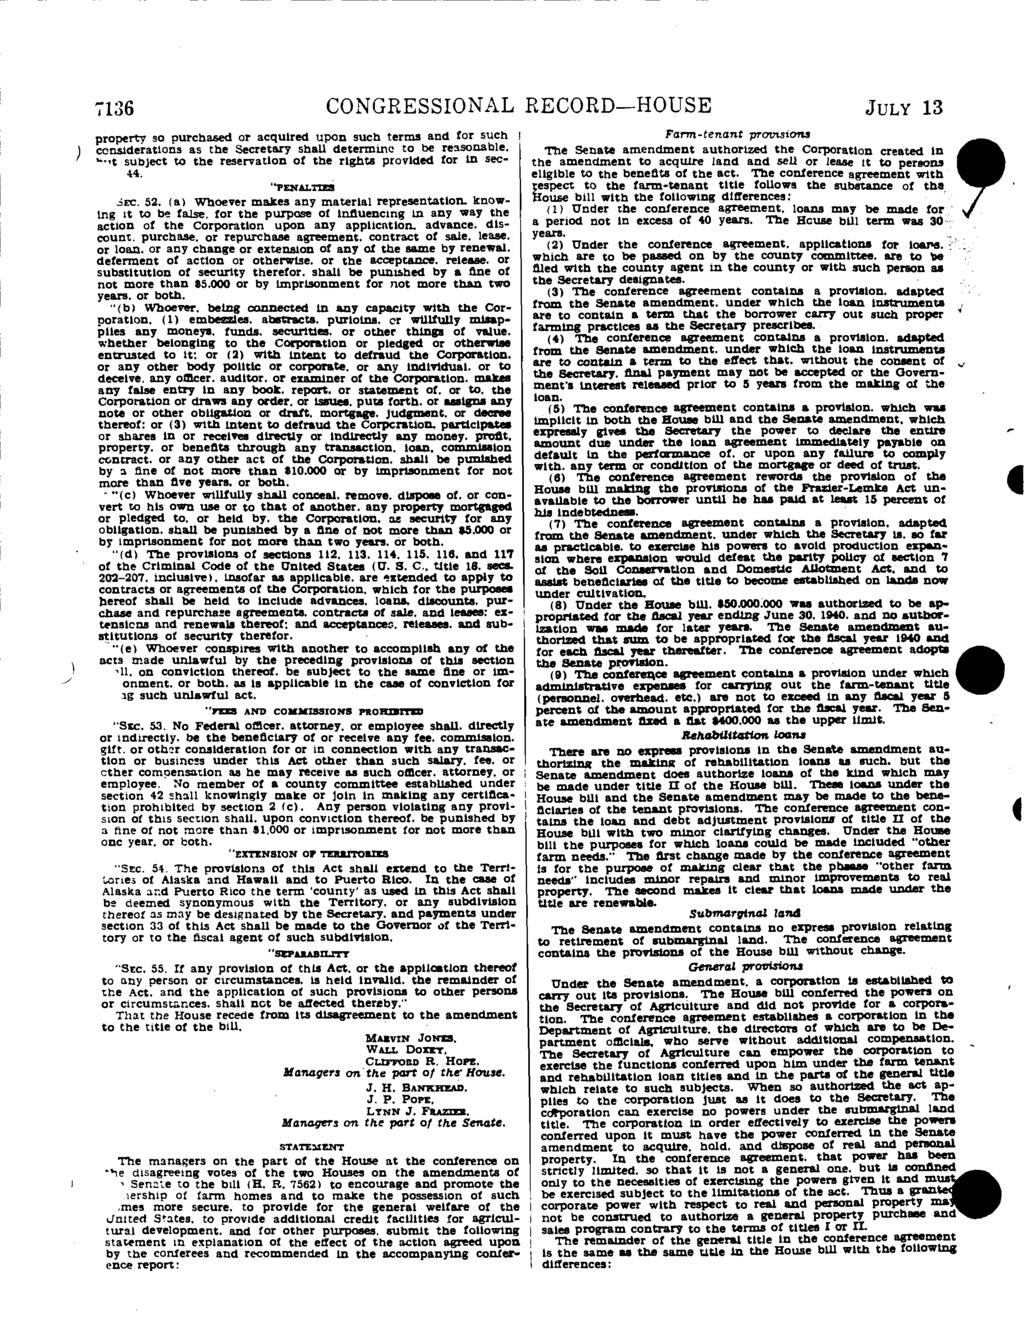 7136 CONGRESSIONAL RECORD-HOUSE JULY 13 property so purchased or acquired upon such terms and for such considerations as the Secretary shall determthe to be reasonable.